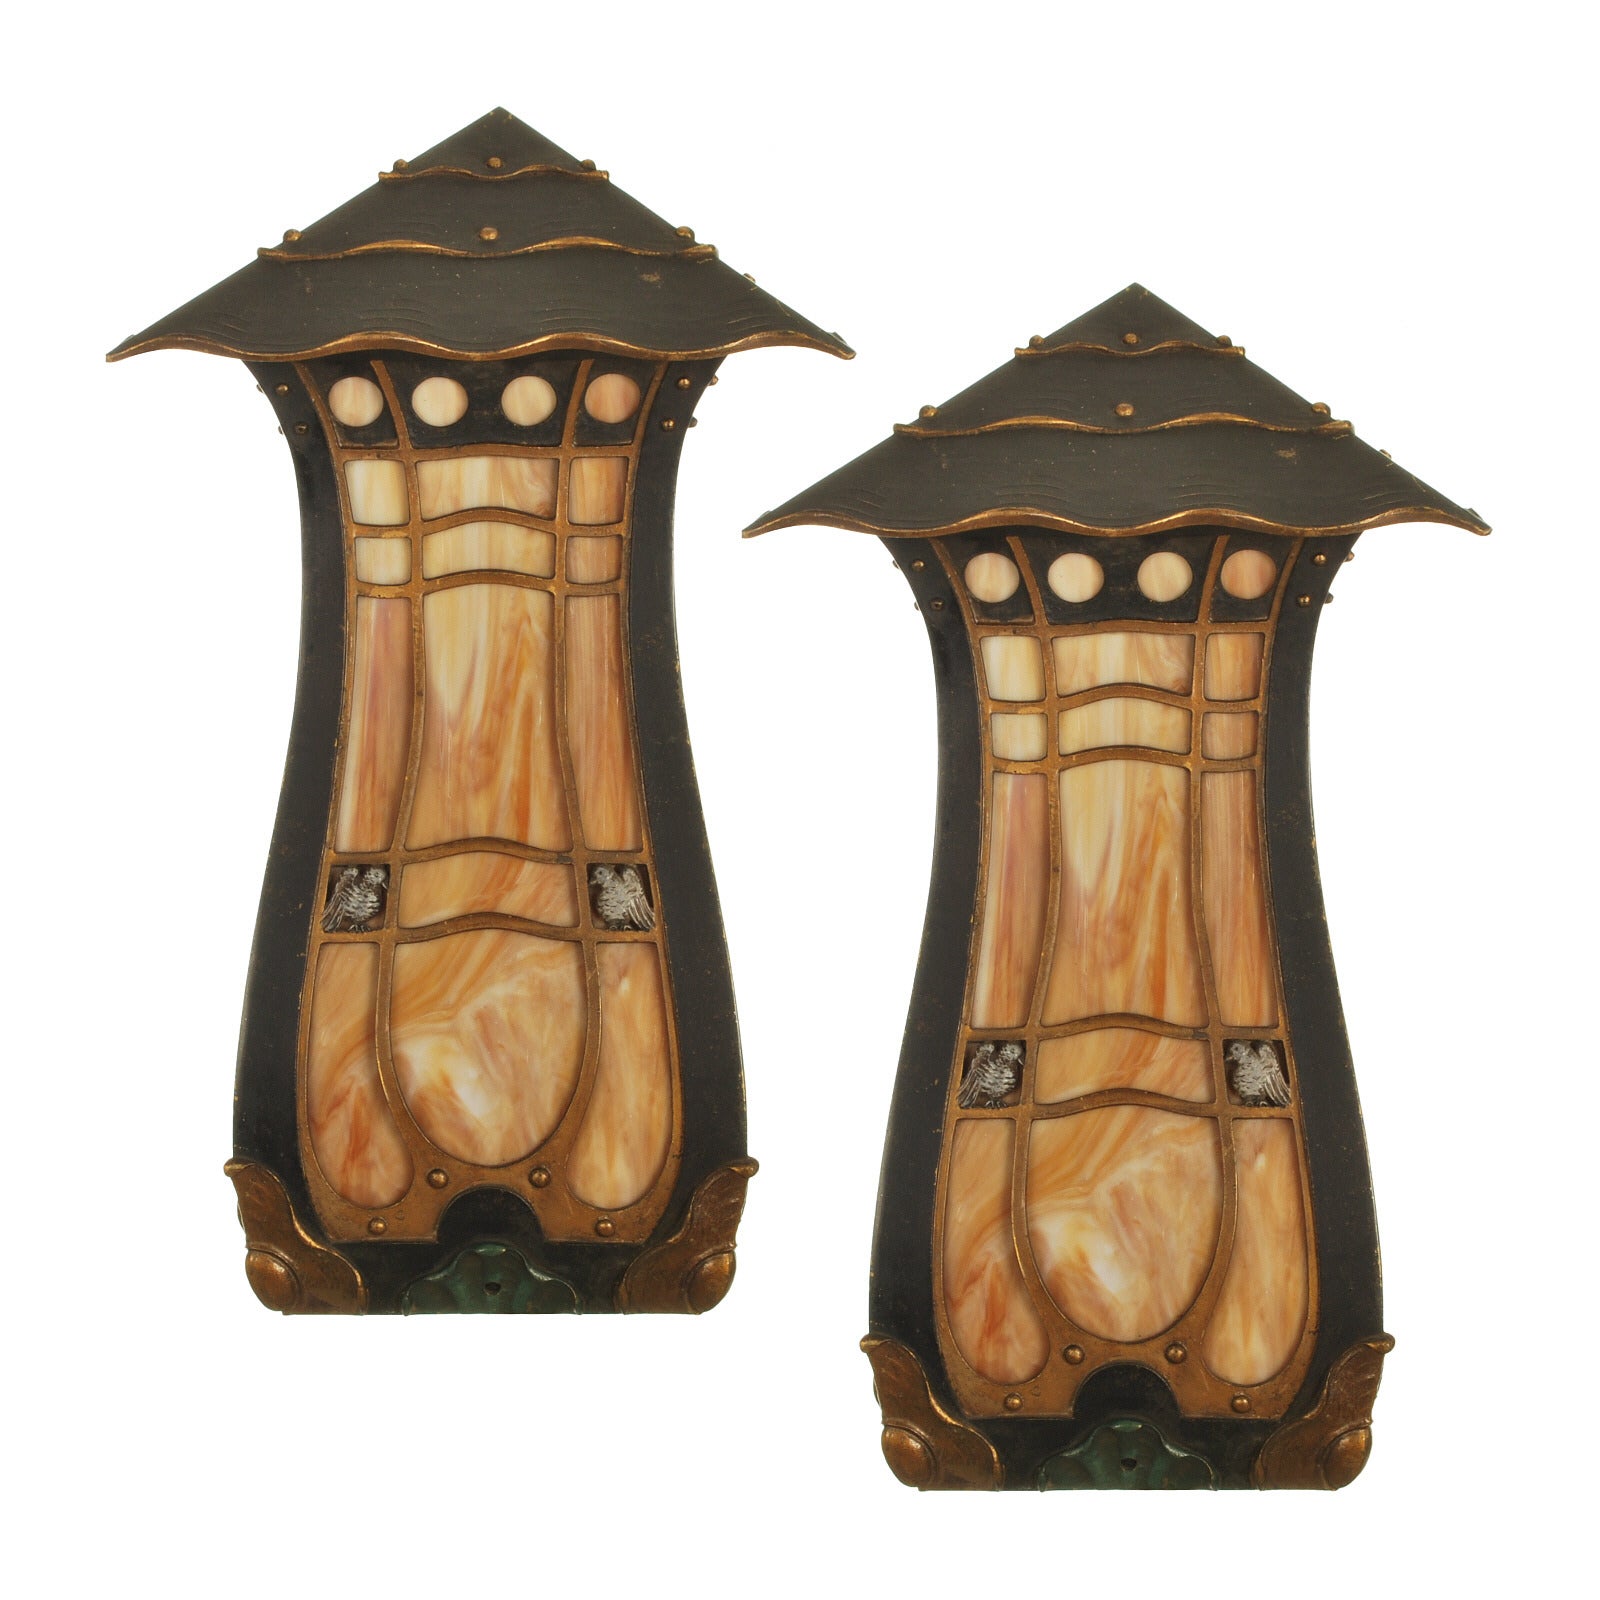 Period Arts and Crafts Corner Wall Sconces with Slag Glass